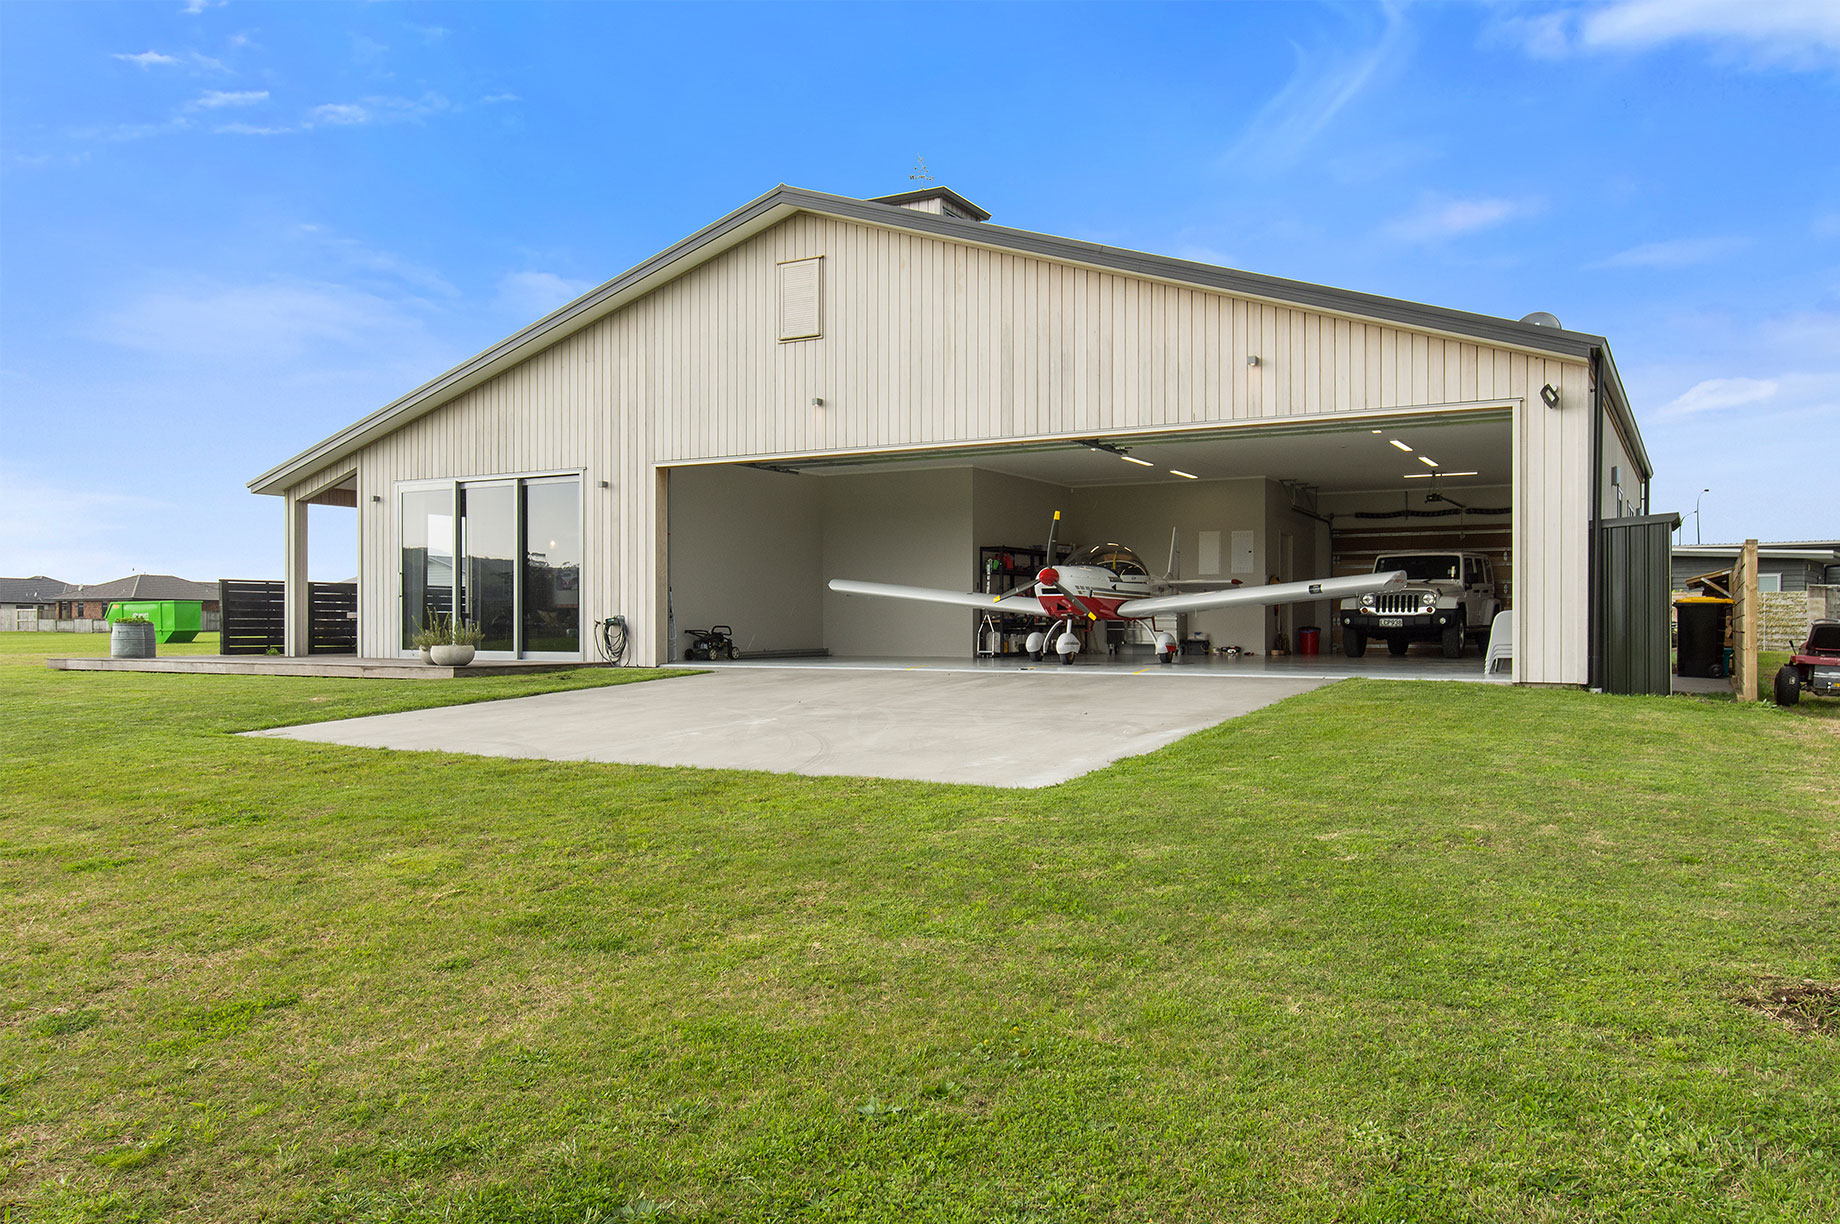 House with a small plane garage exterior